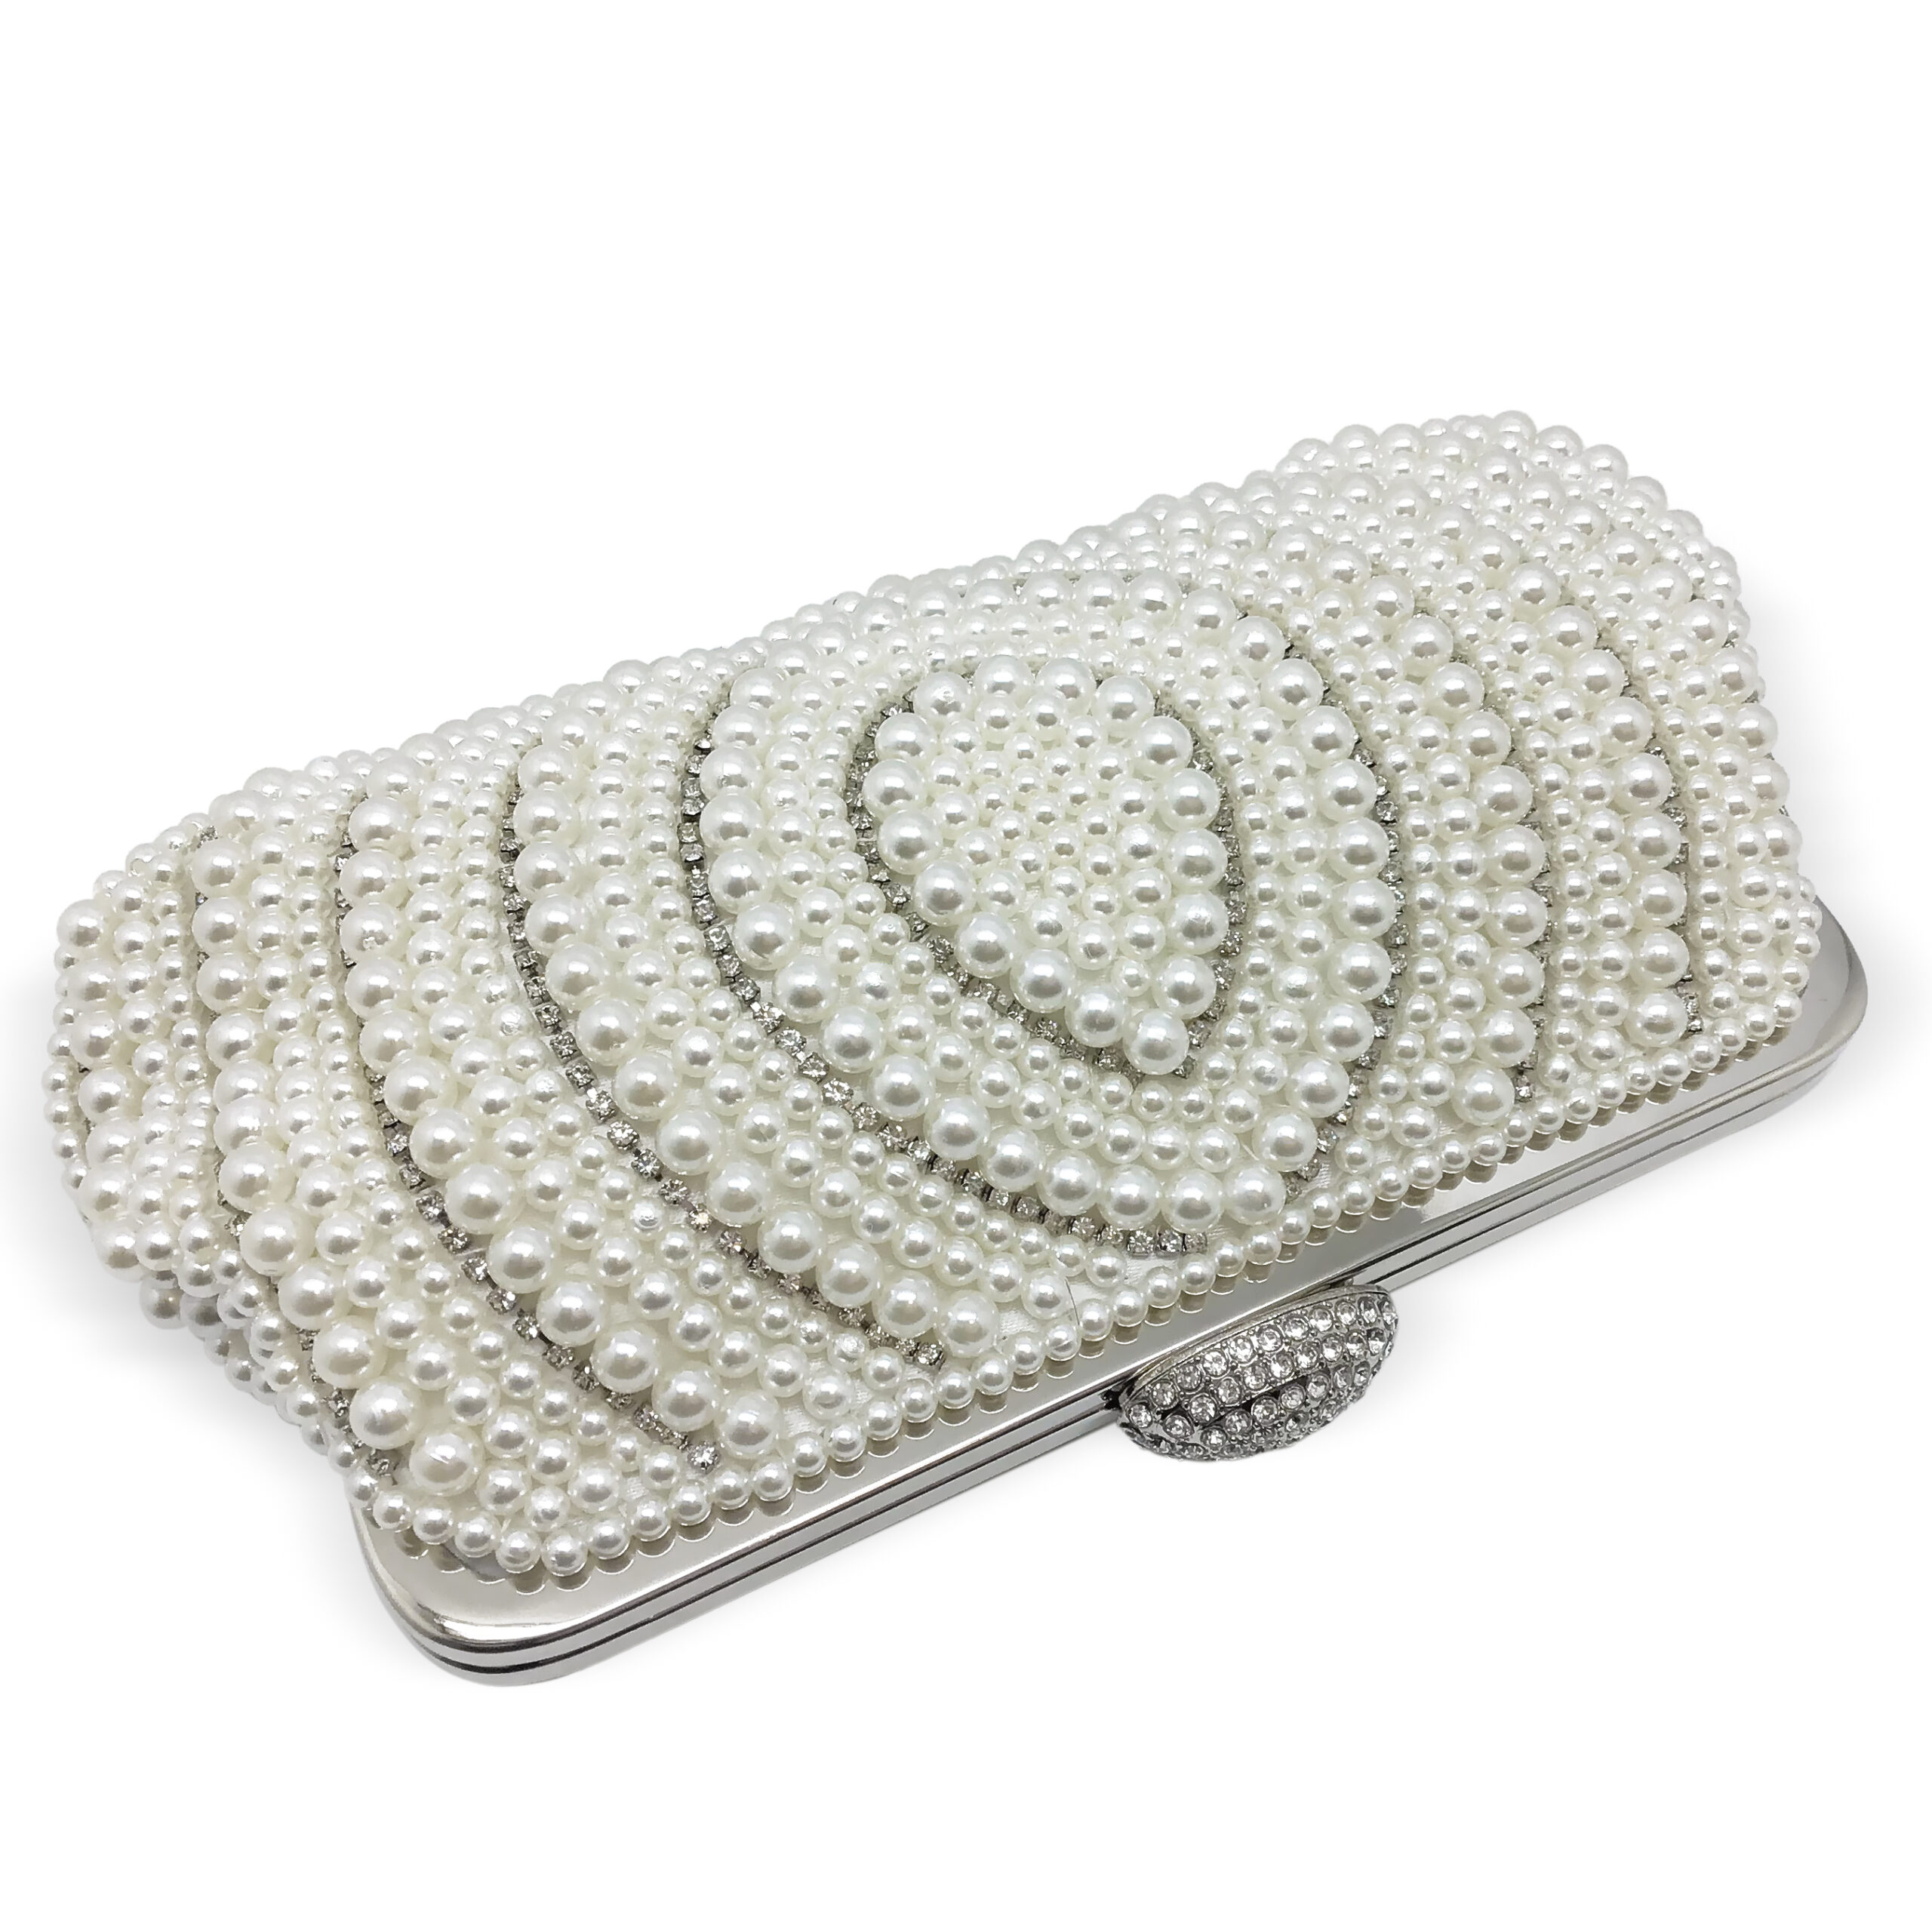 Pearl Bridal Clutch|Meryl|Jeanette Maree|Shop Online Now